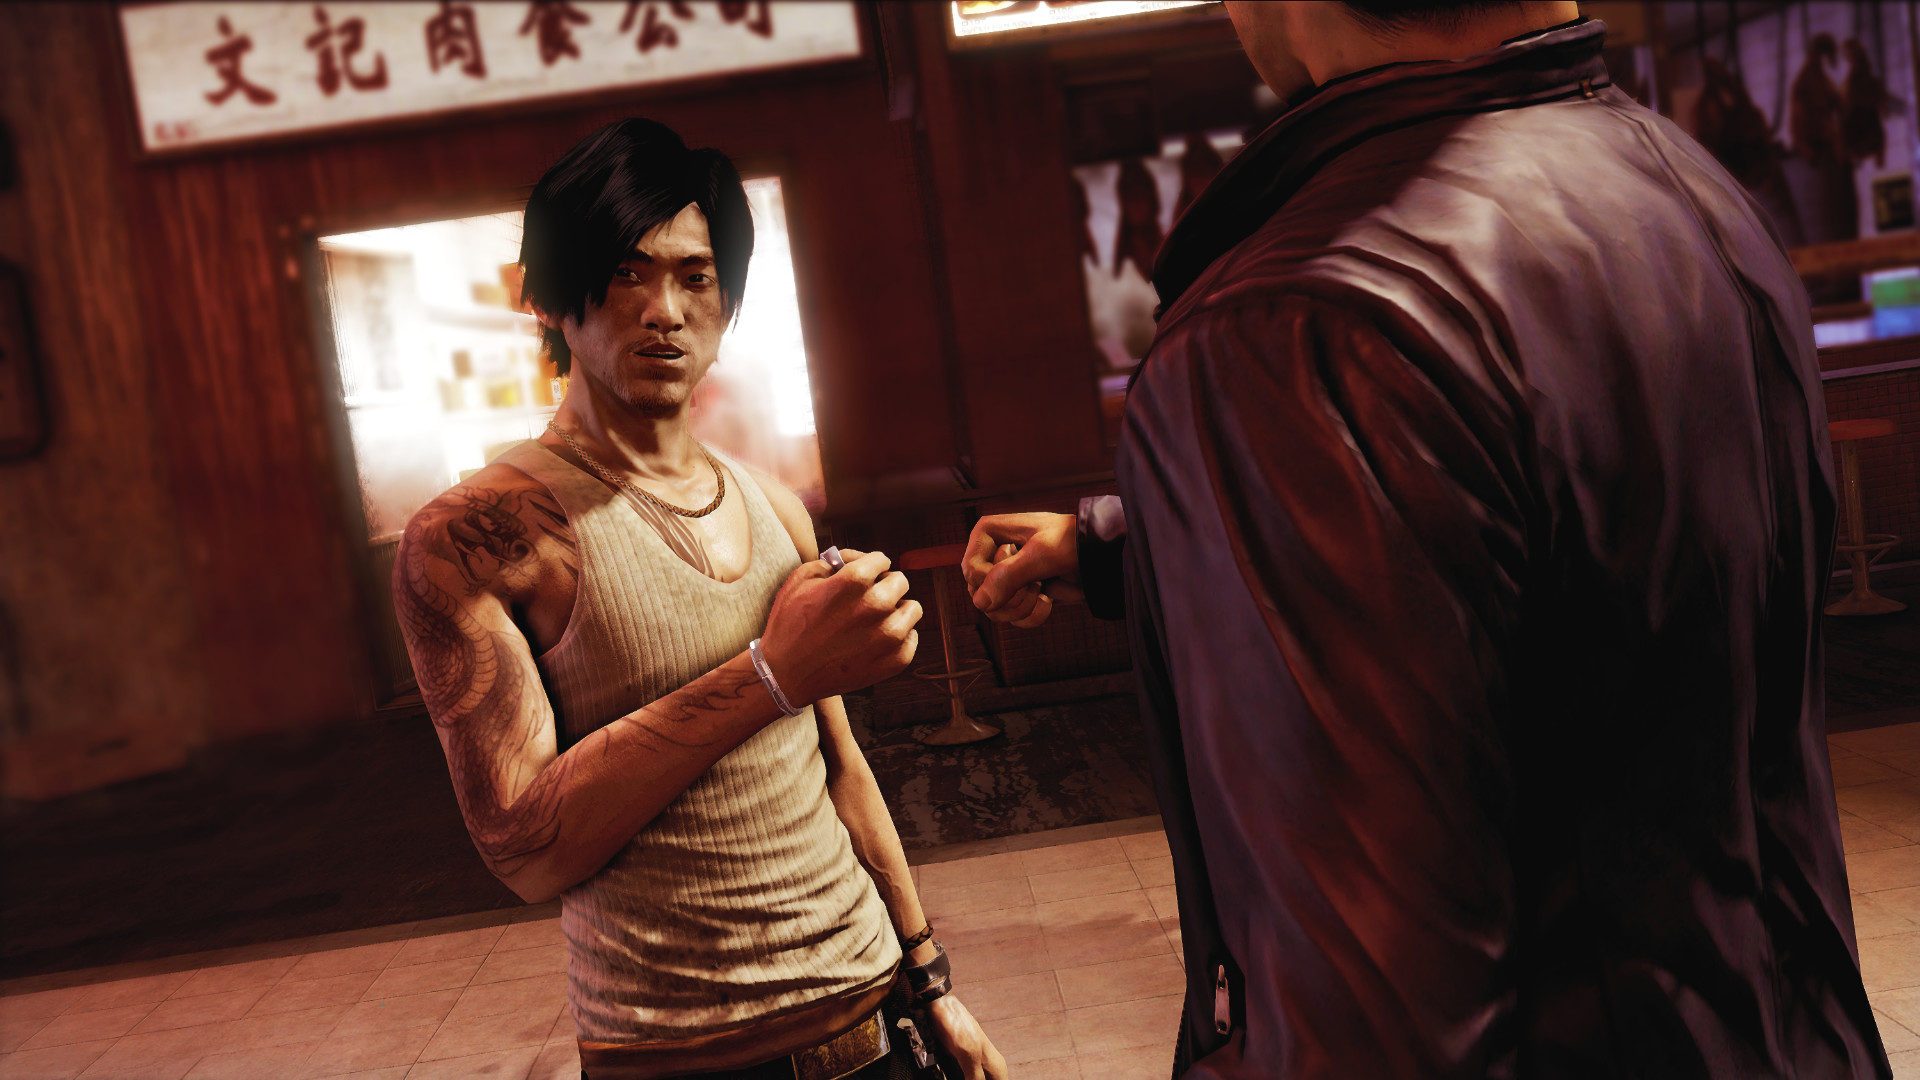 Sleeping Dogs Definitive Edition available for free on Xbox One